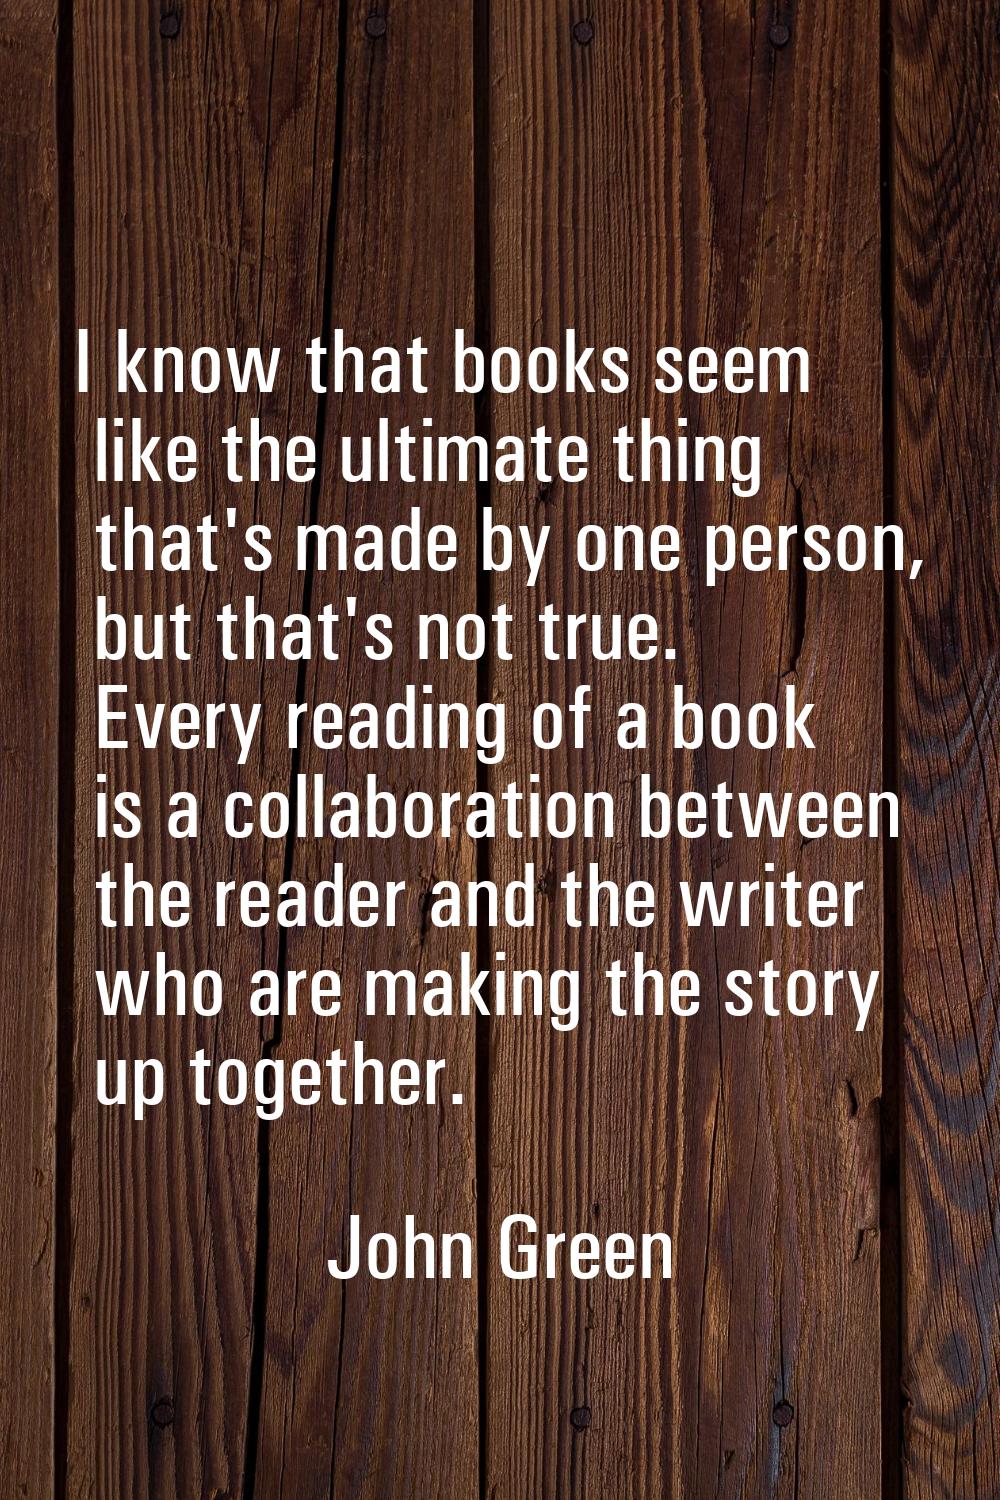 I know that books seem like the ultimate thing that's made by one person, but that's not true. Ever